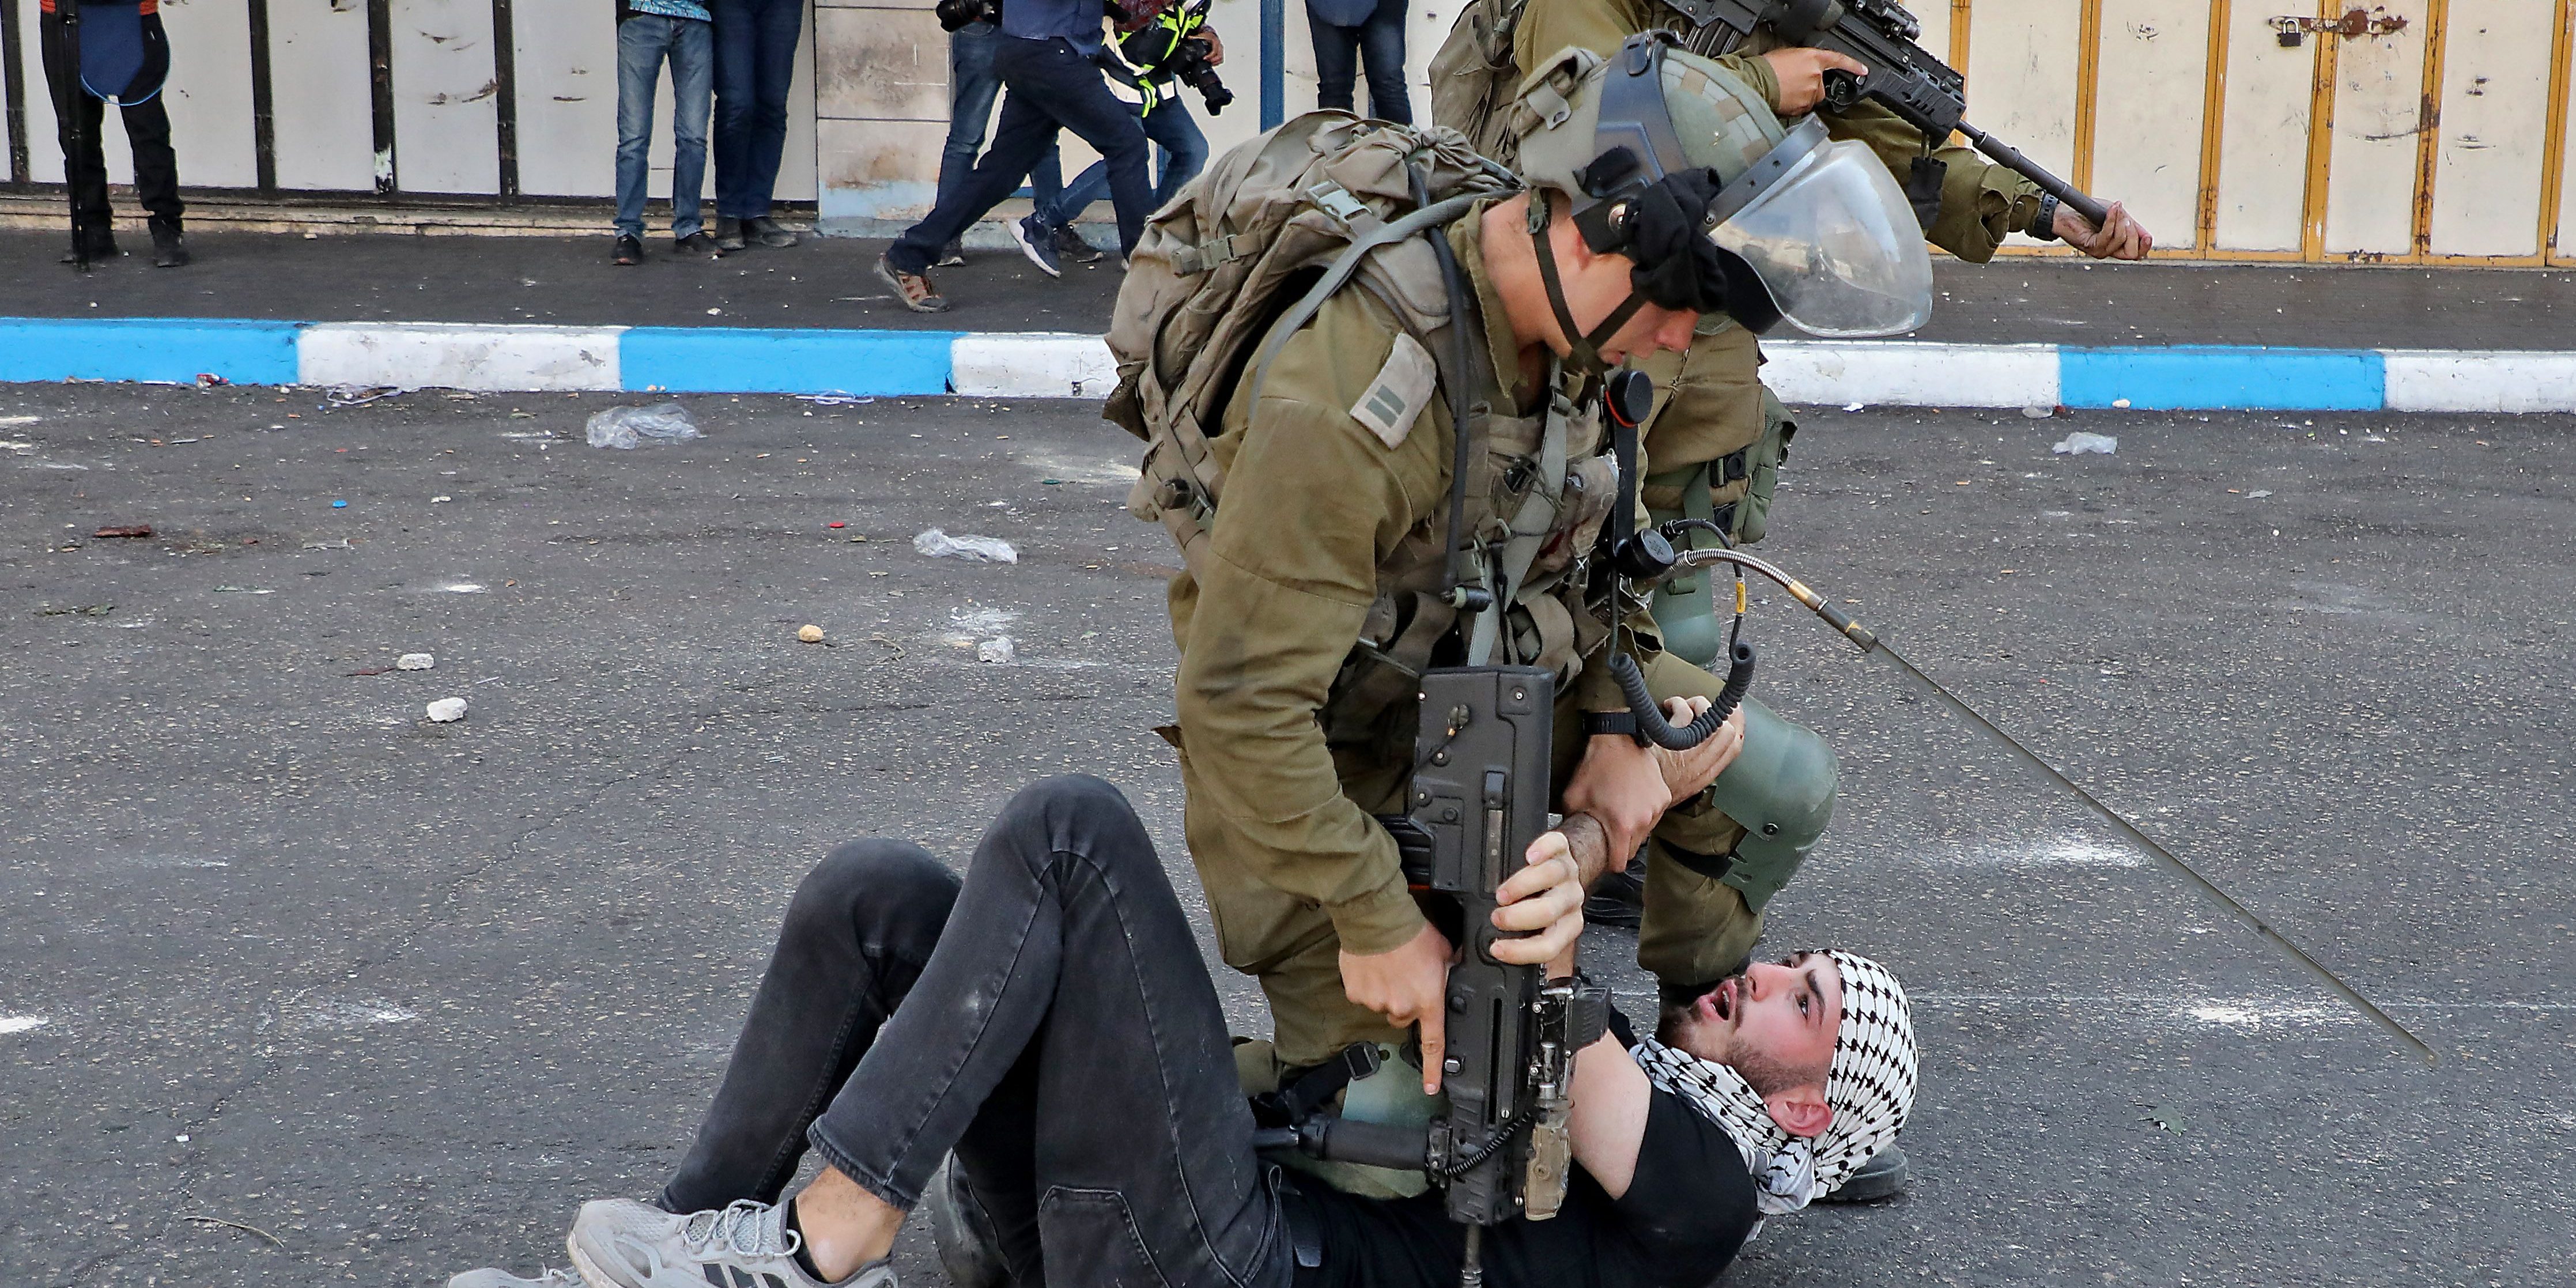 An Israeli soldier kneels on the chest of a Palestinian protester on the streets of Hebron, in the occupied West Bank, in October 2022.